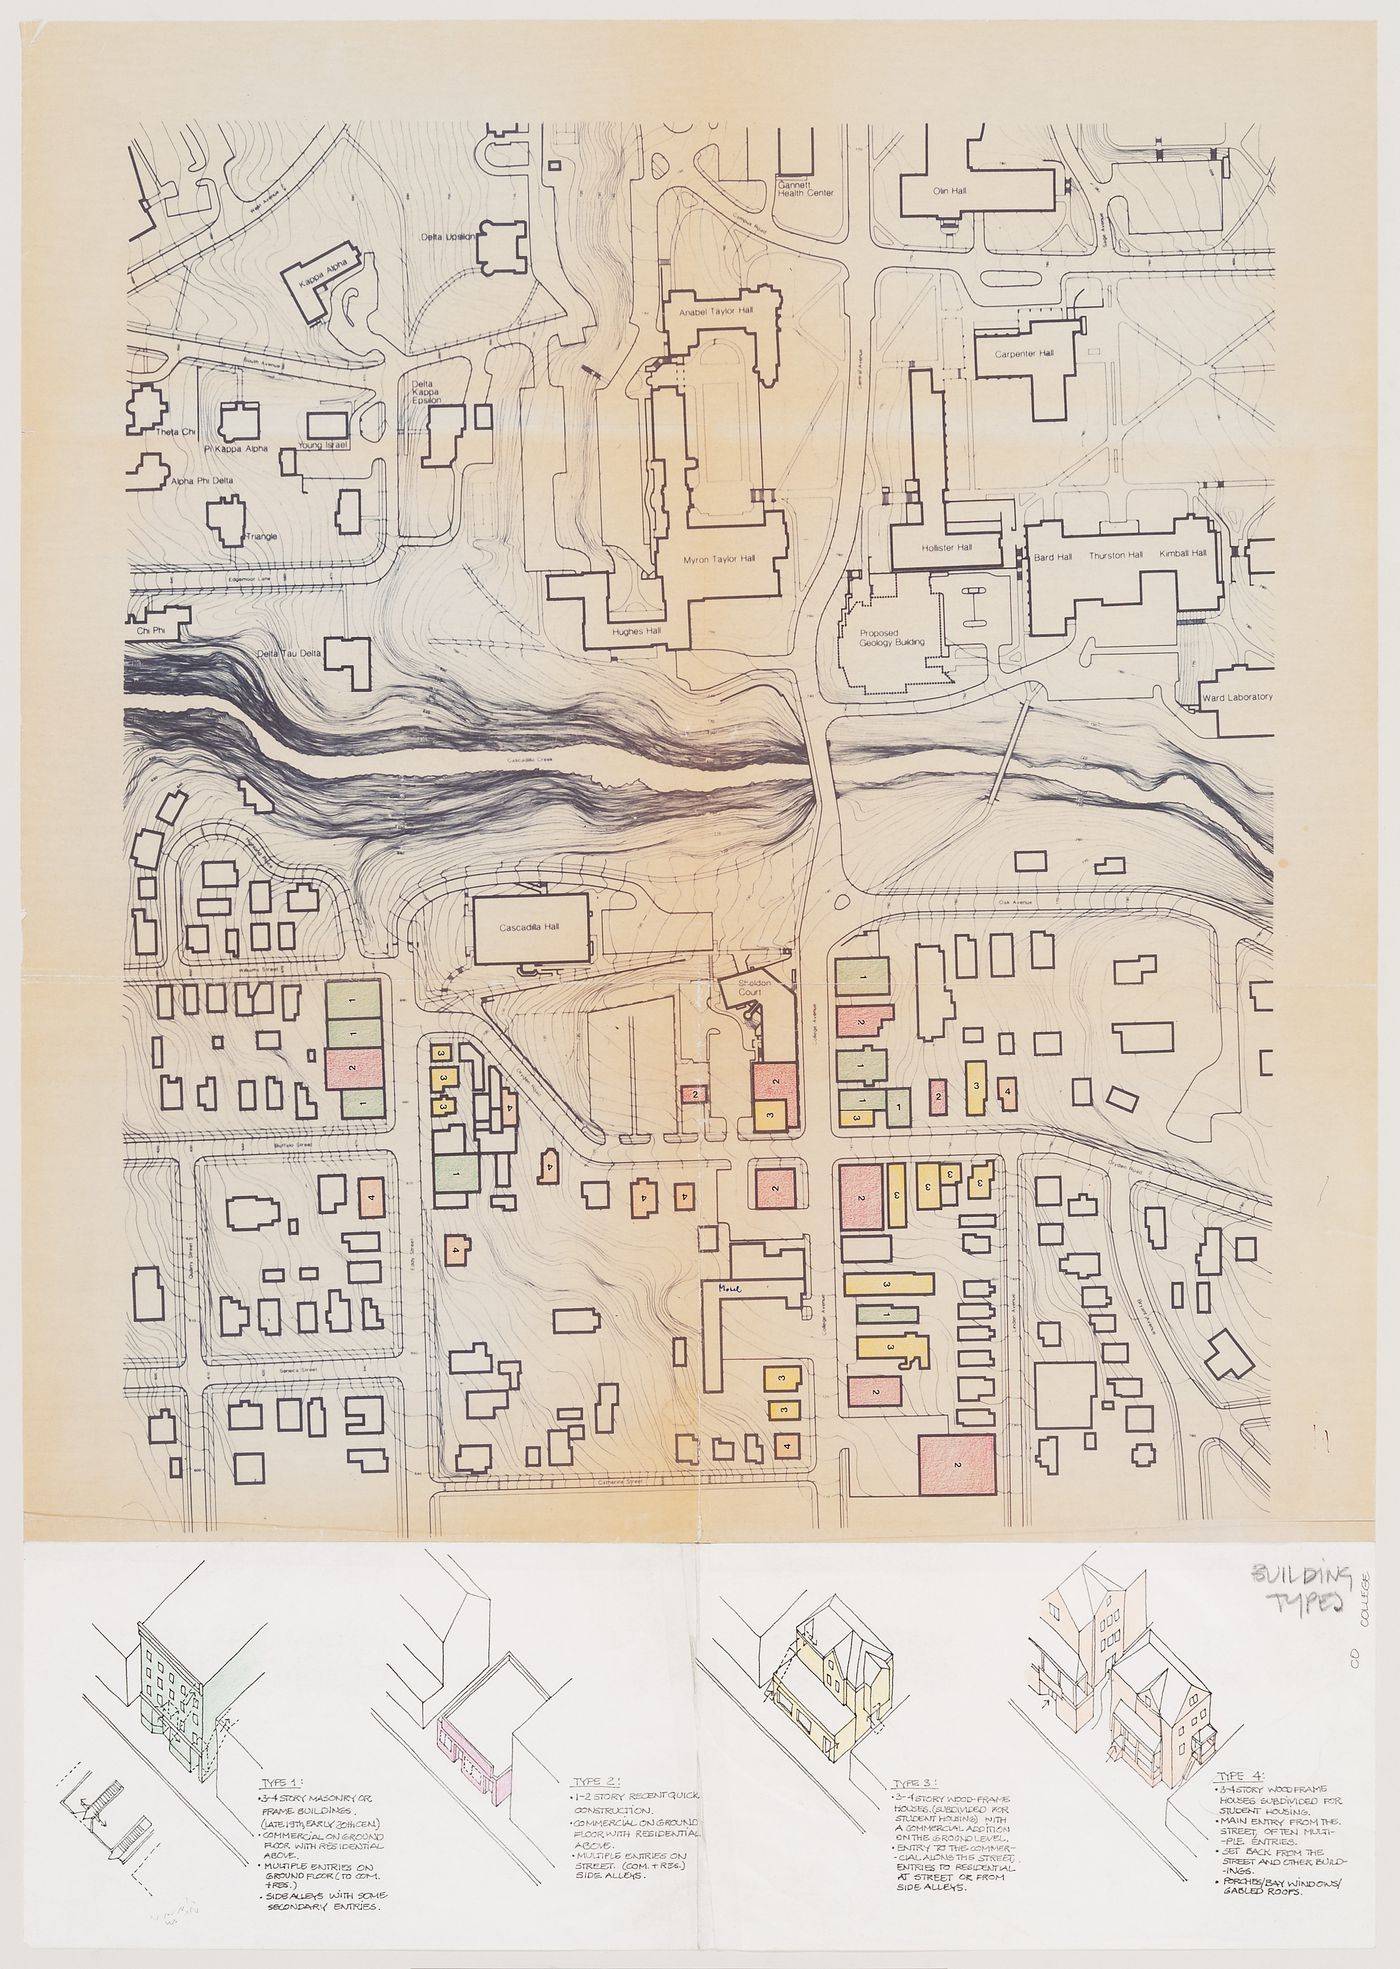 Center for Theatre Arts, Cornell University, Ithaca, New York: topographic survey of study area and axonometrics of building types for the Collegetown urban design study